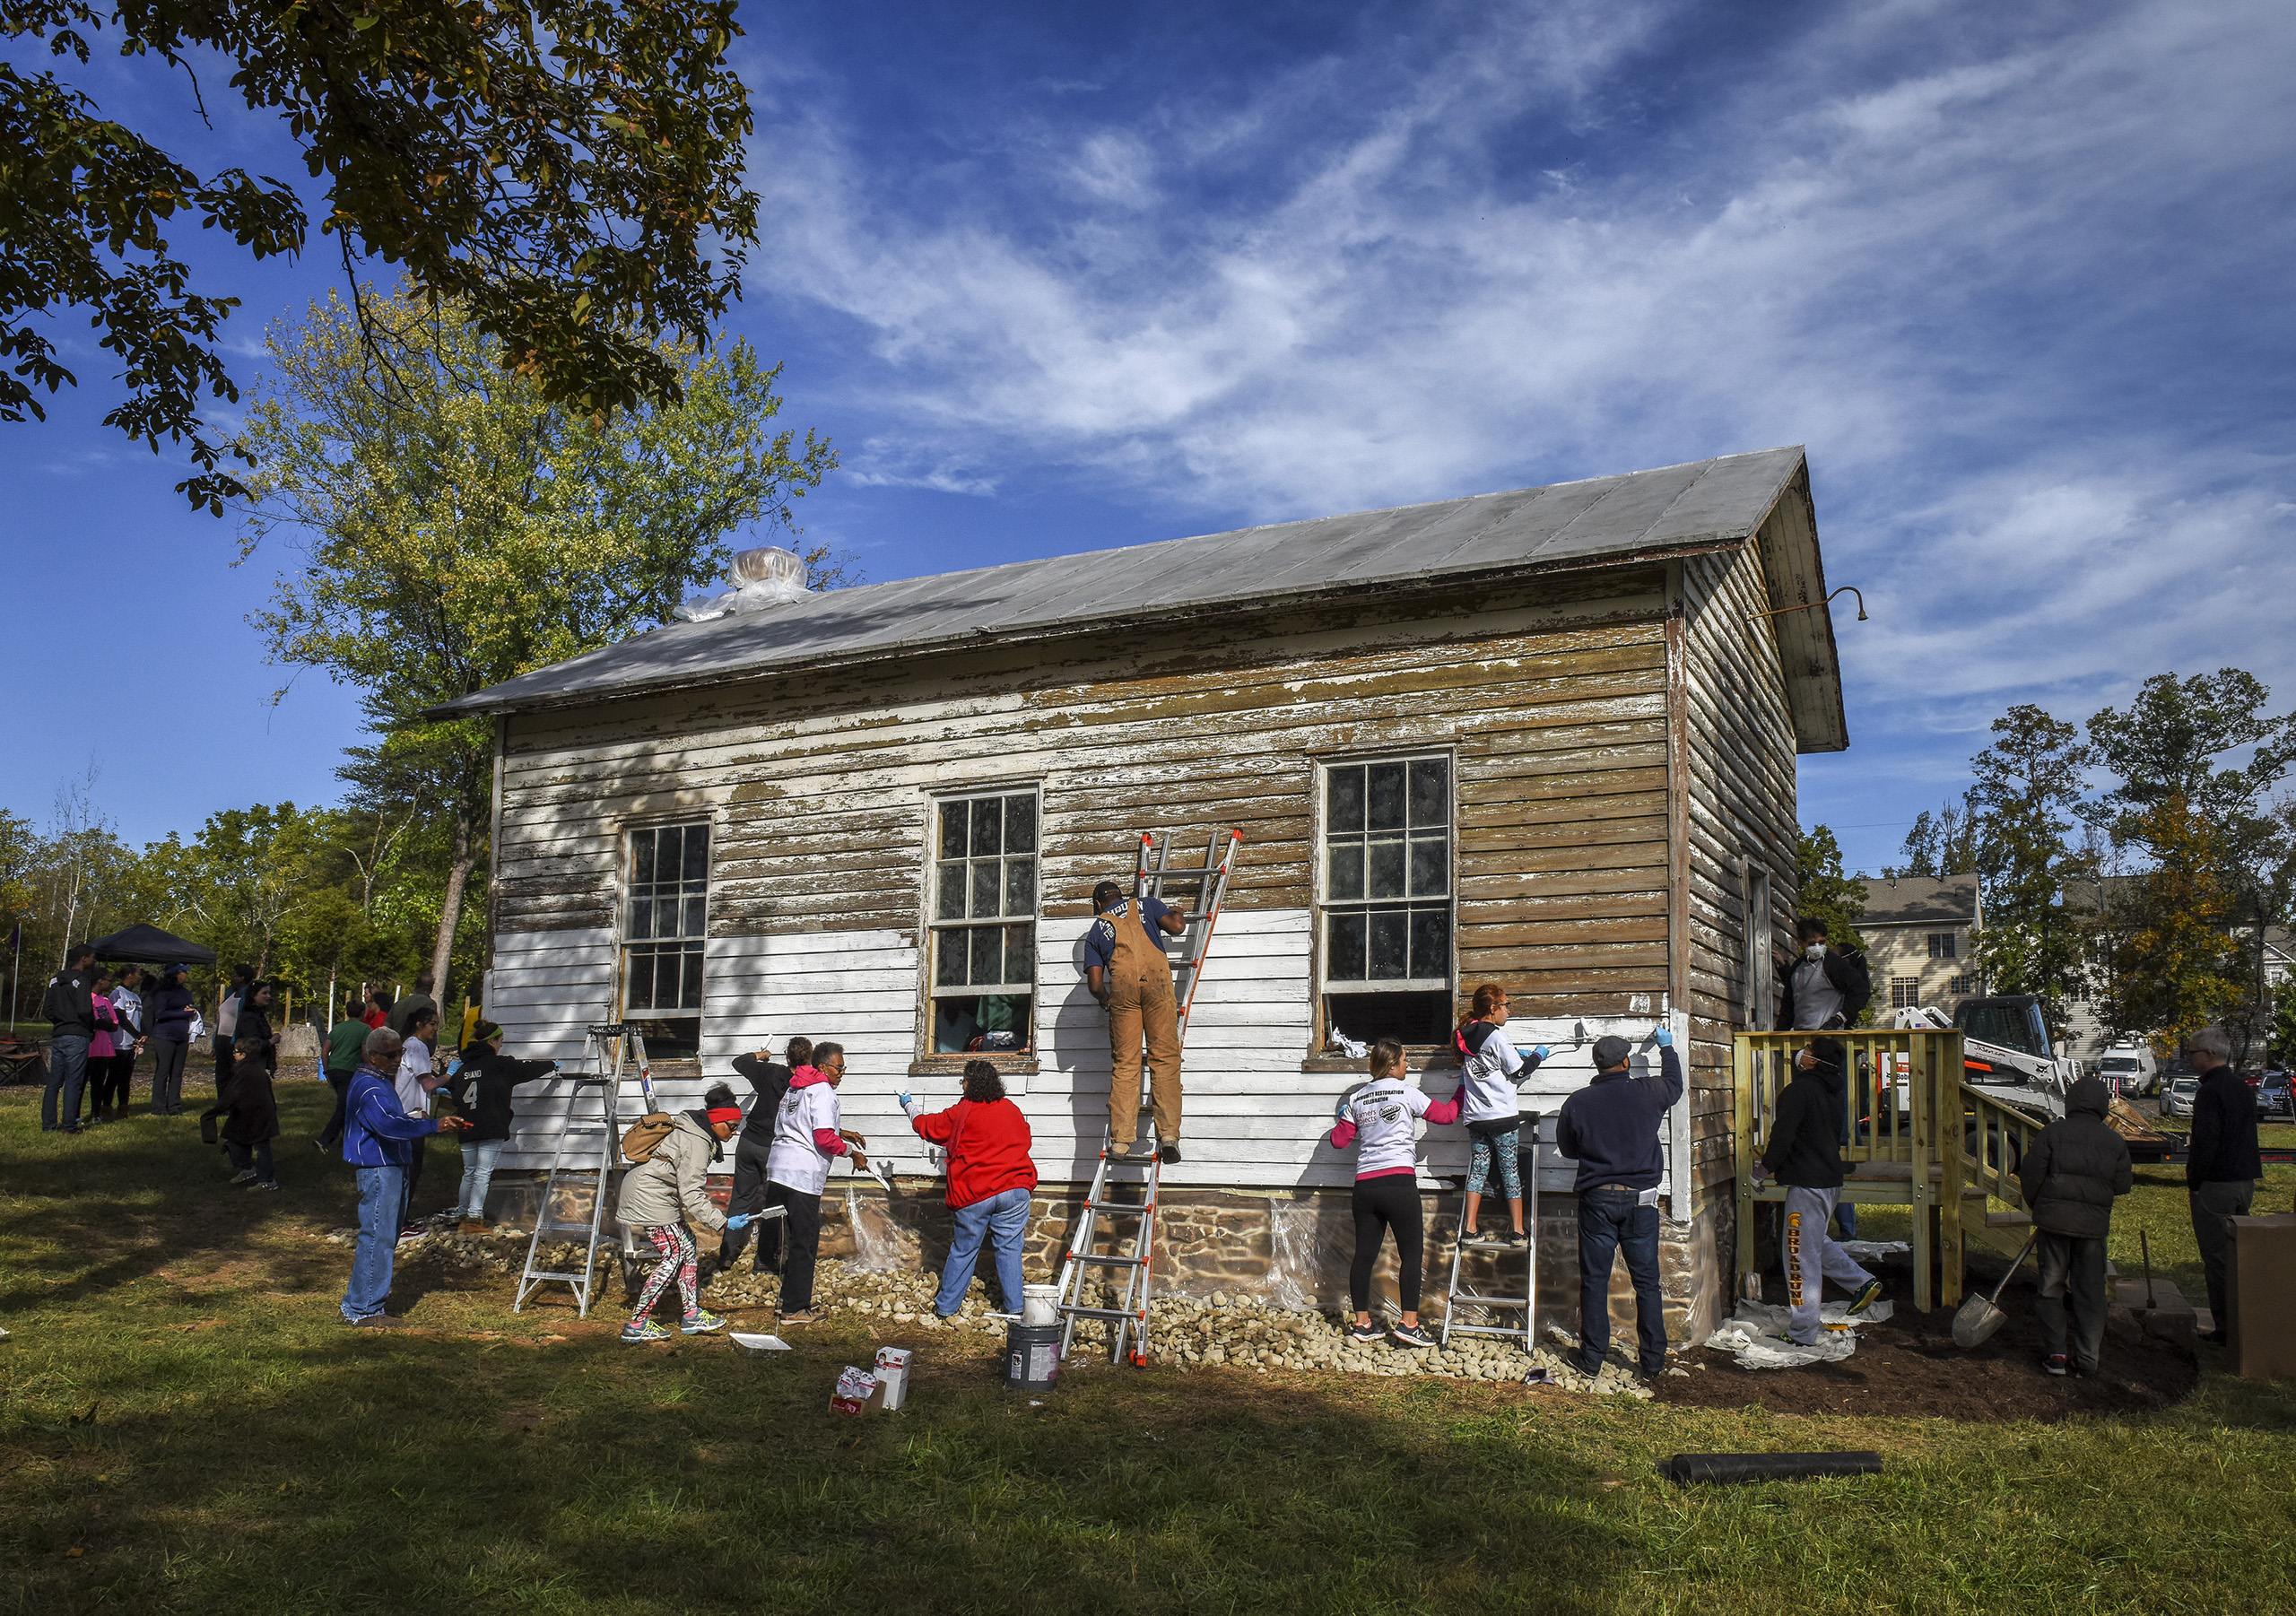 A group tackles painting the exterior as volunteers gather to restore the Ashburn Colored School, a nineteenth-century schoolhouse vandalized with racist symbols and hate language,  in Ashburn, VA on Oct. 9, 2016. (Bill O'Leary—The Washington Post/Getty Images)